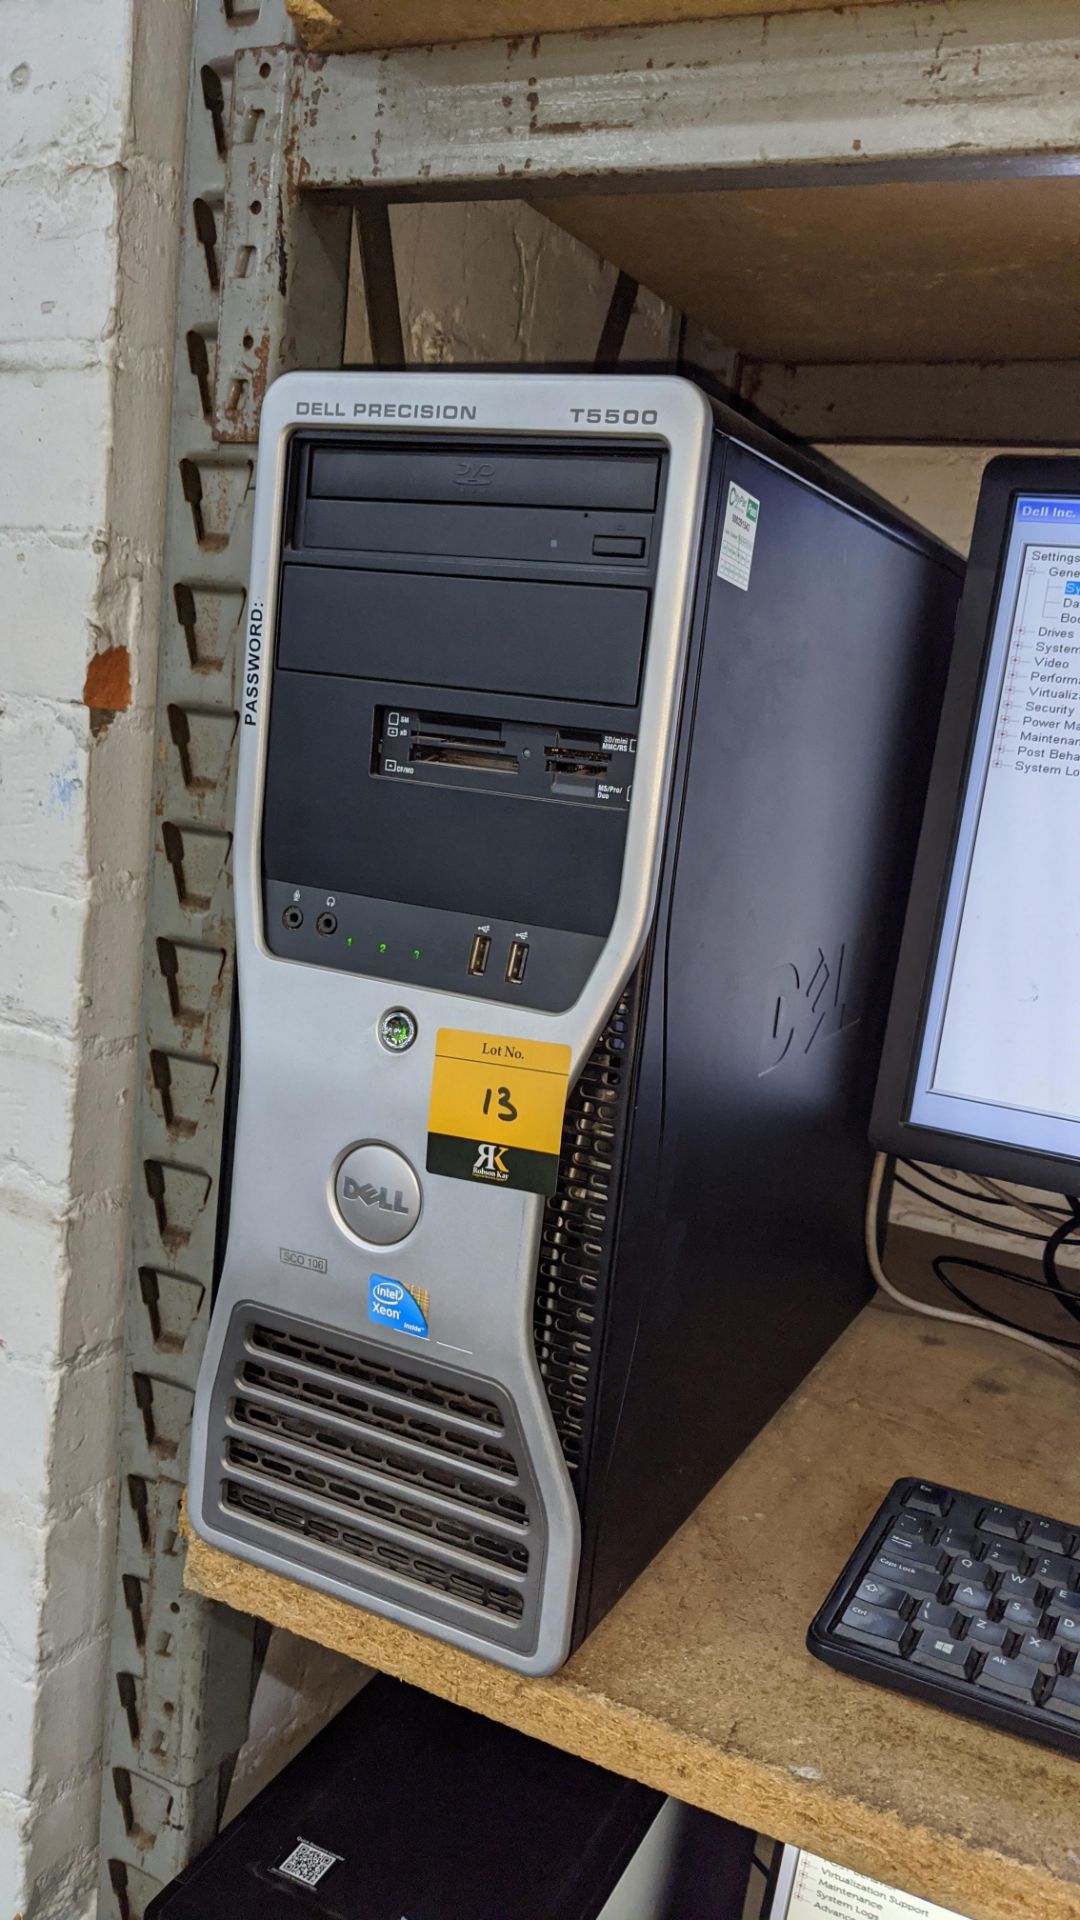 Dell Precision T5500 tower computer with Intel Xeon E5502 processor, 16Gb RAM, 250Gb HDD etc. includ - Image 3 of 4